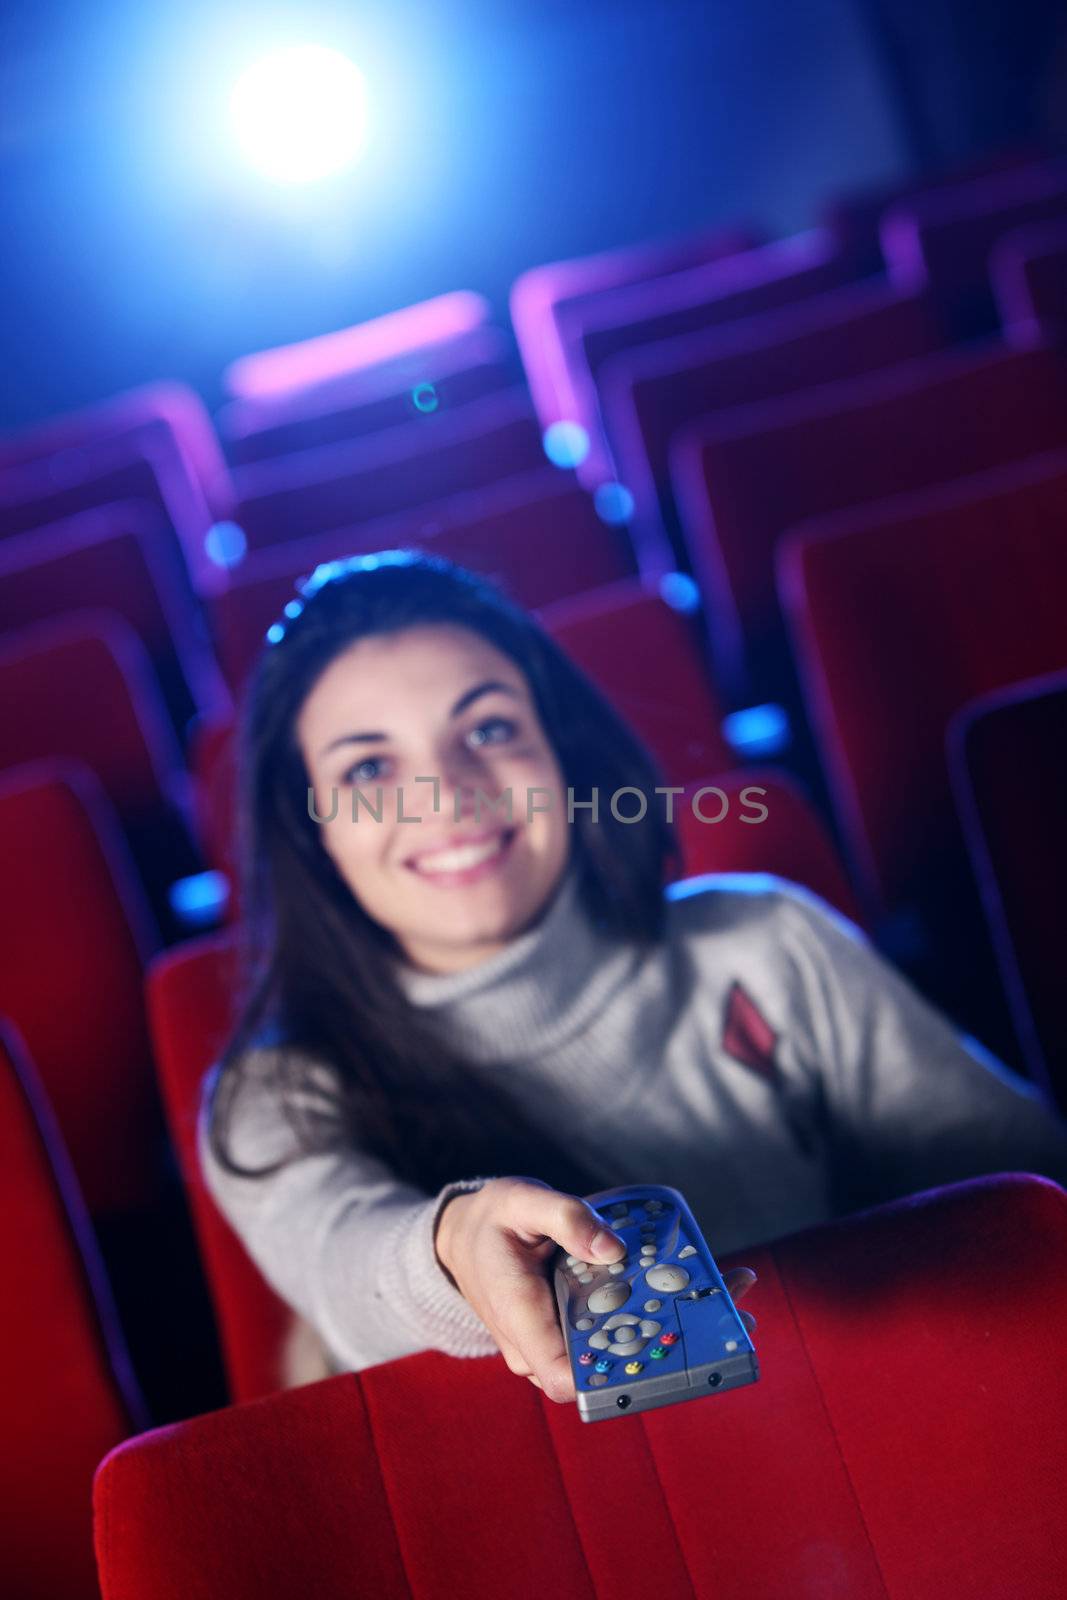 woman  holding a remote control TV, at a  movie theater. conceptual image